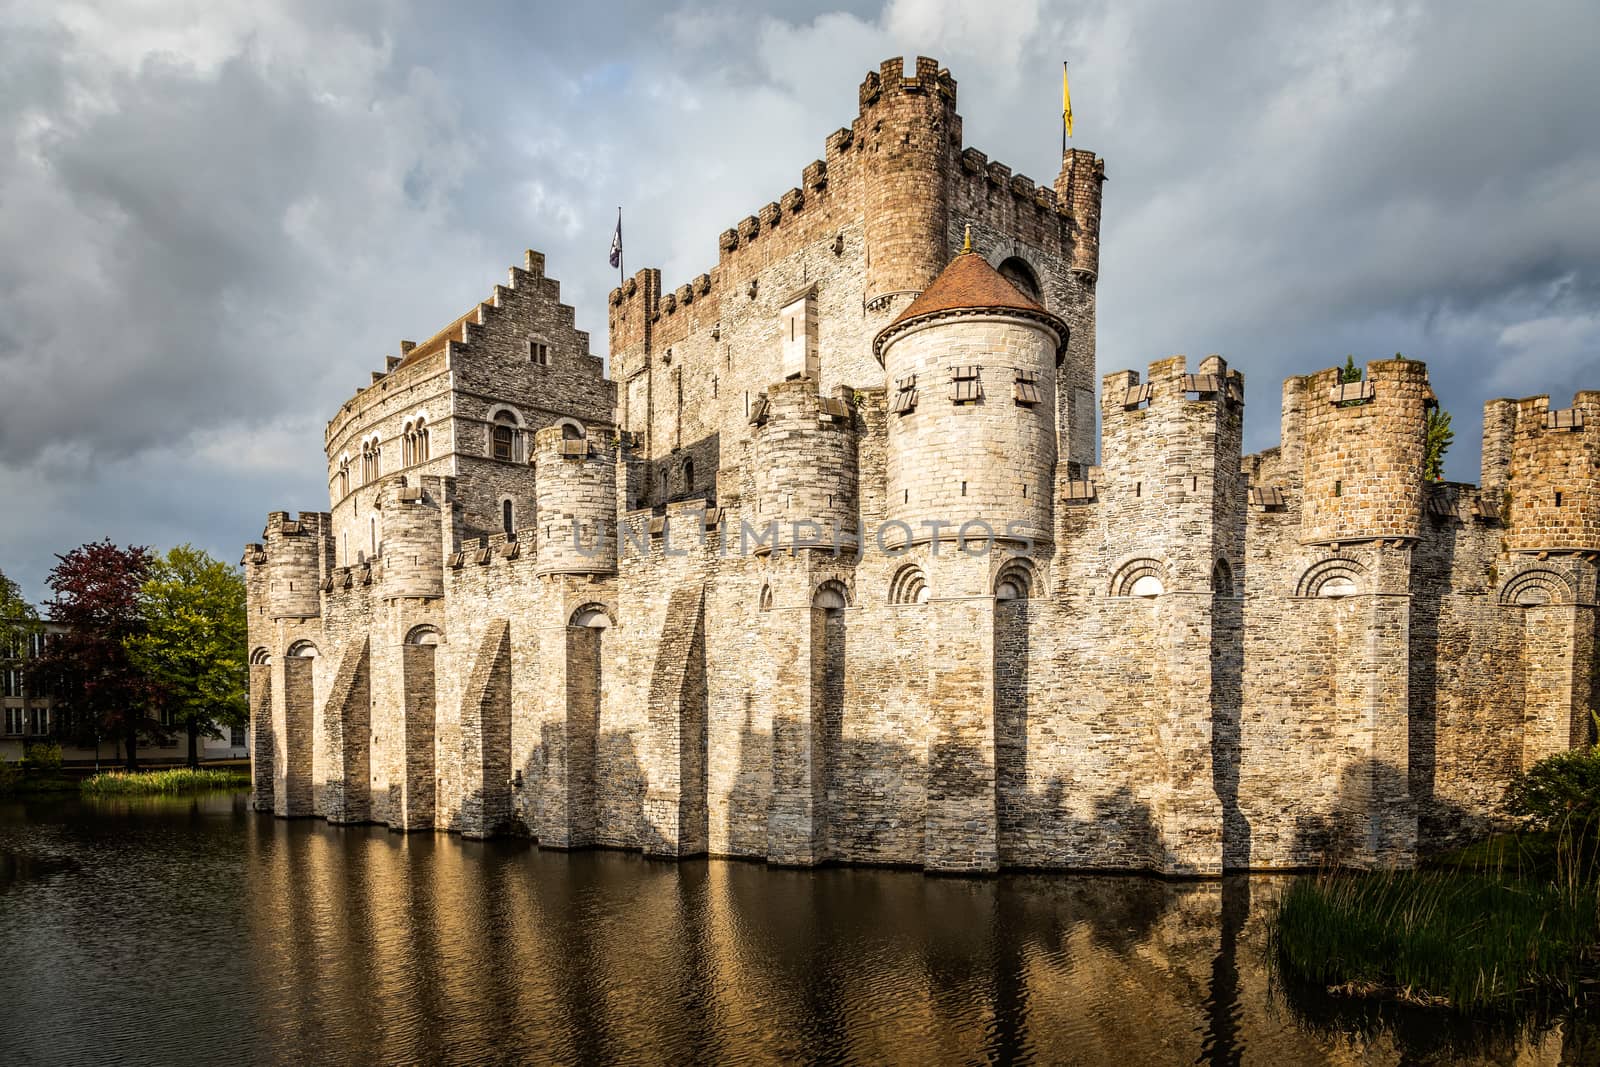 Fortified walls and towers of Gravensteen medieval castle with m by ambeon